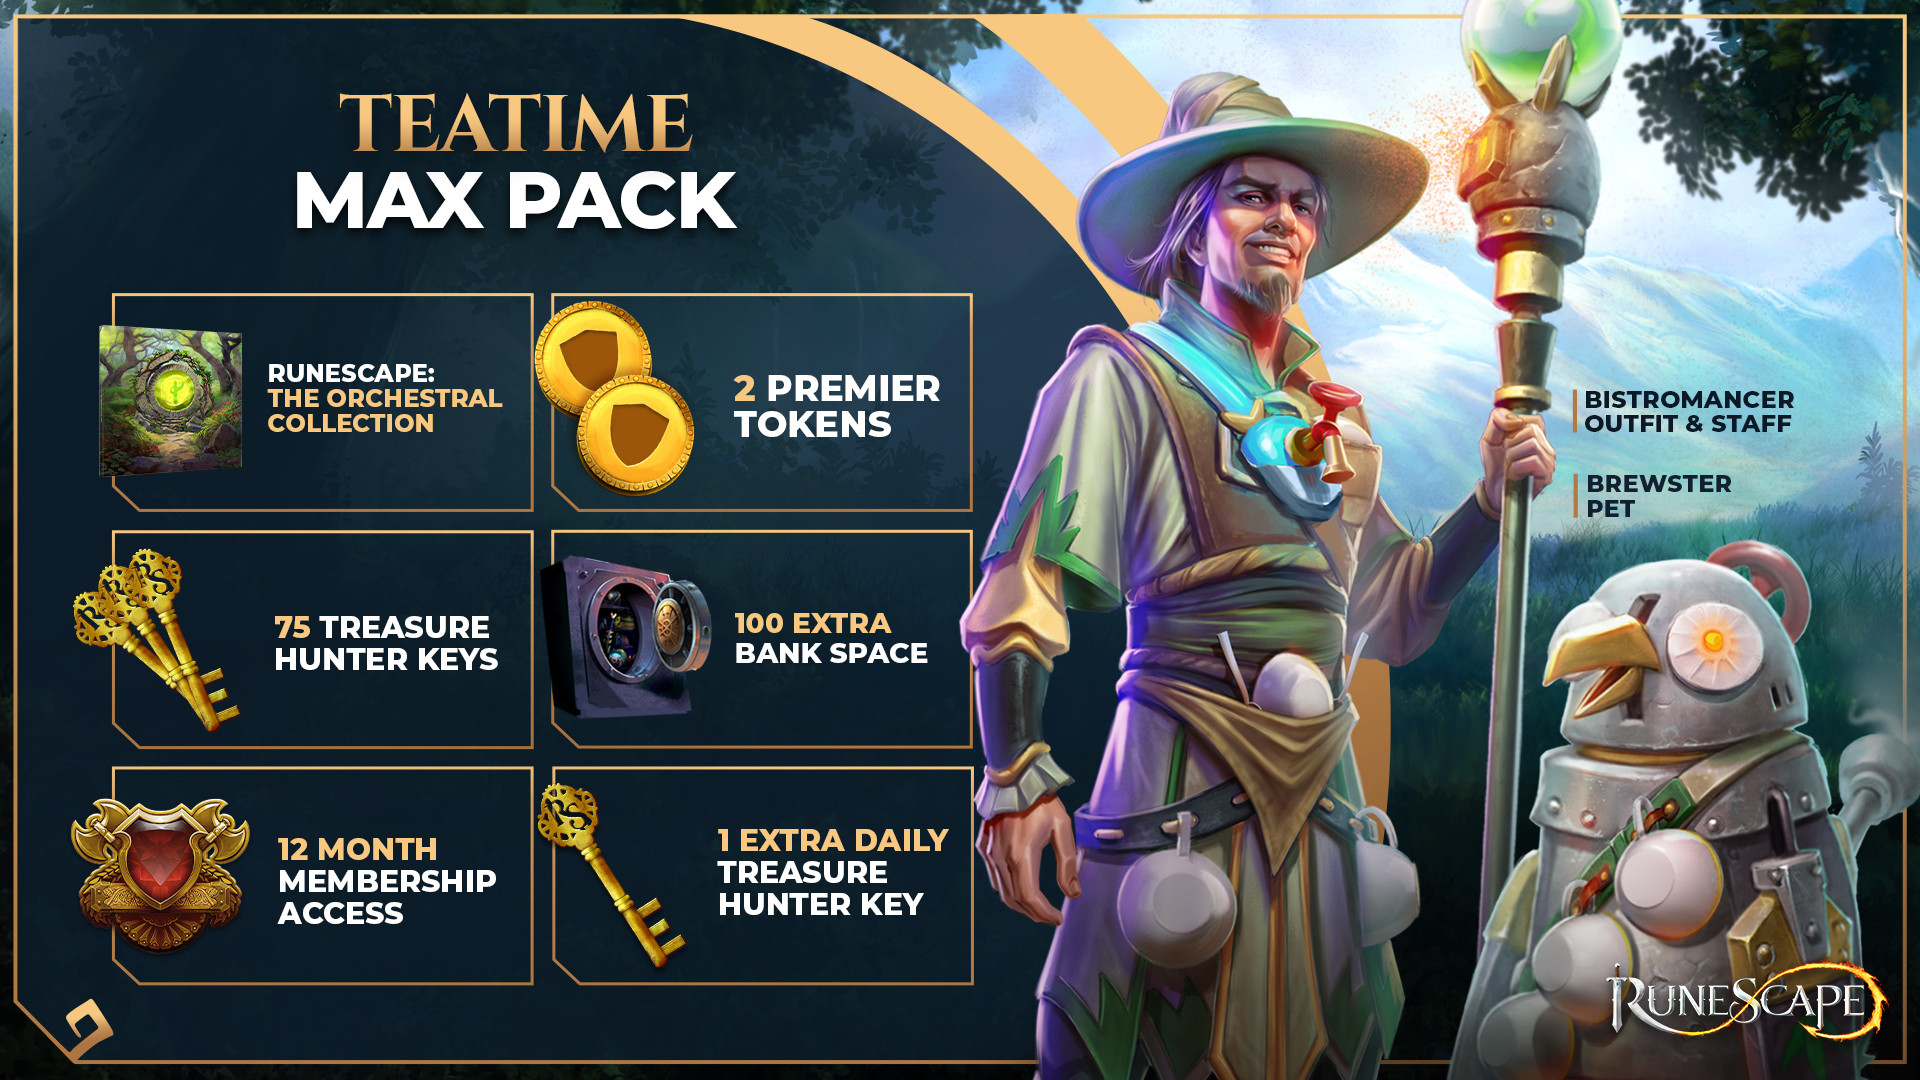 (56.49$) Runescape - Max Pack + 12 Months Membership Manual Delivery